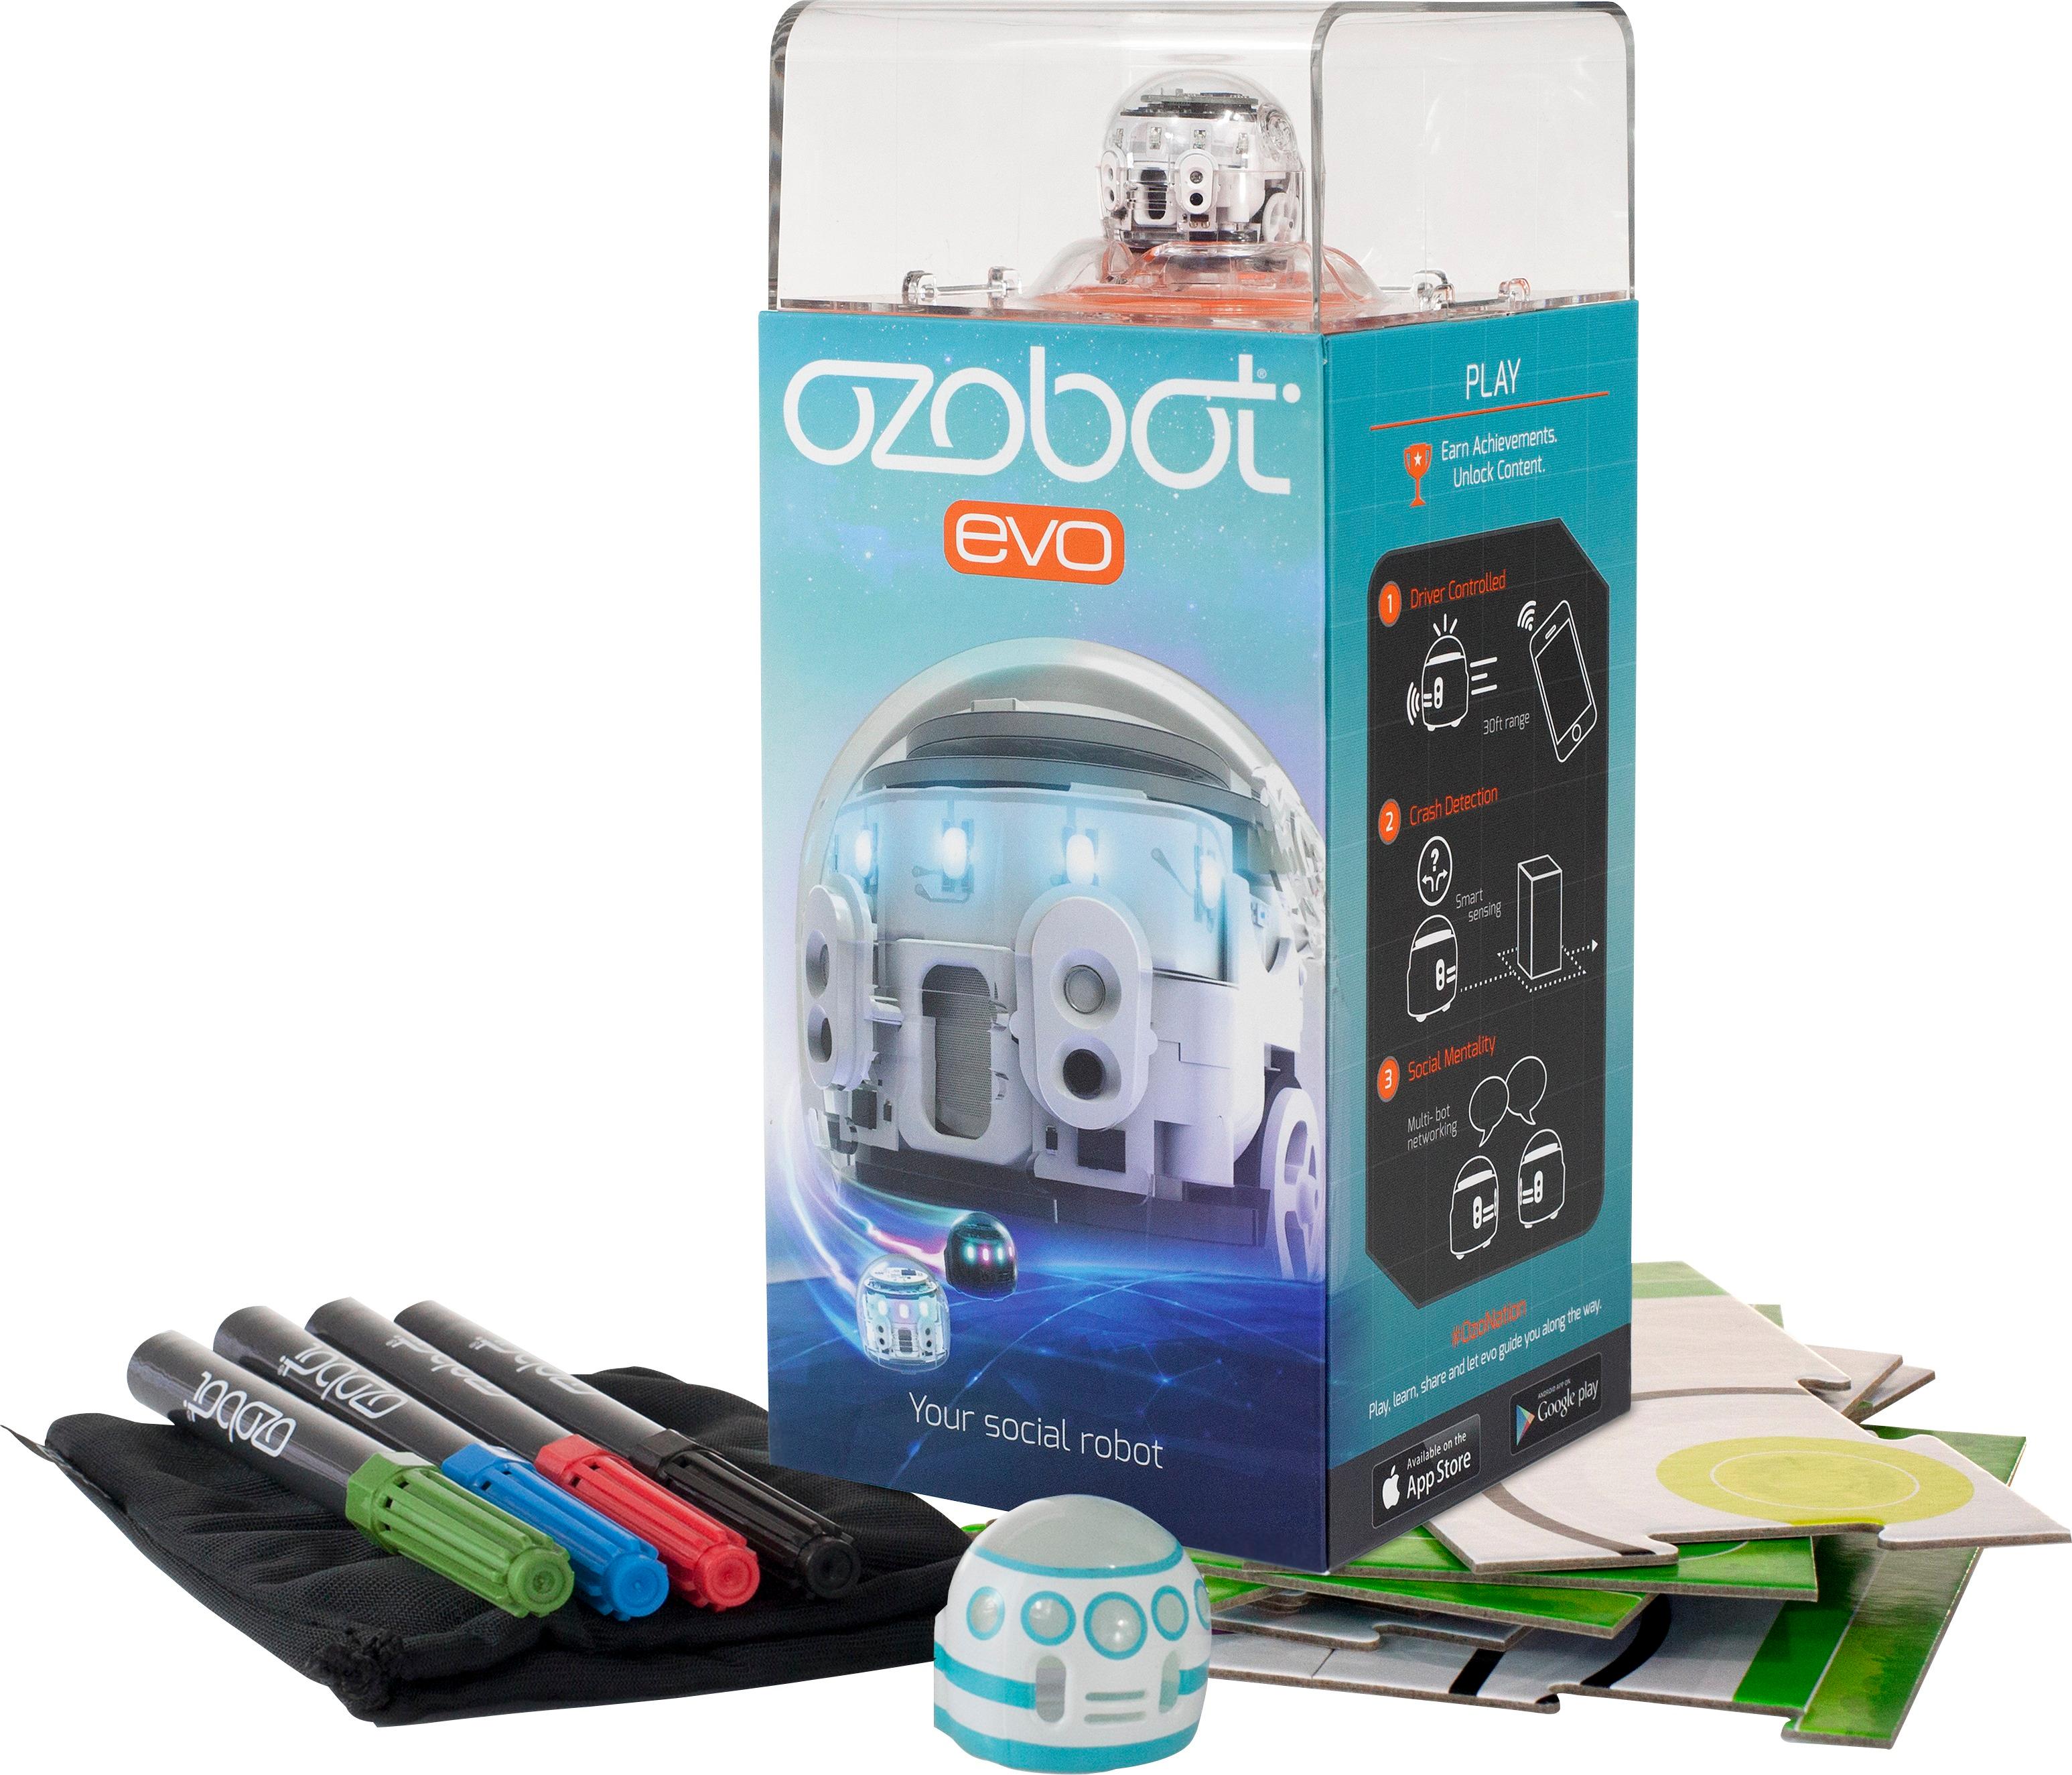 Ozobot Releases Updated Evo - The Toy Book